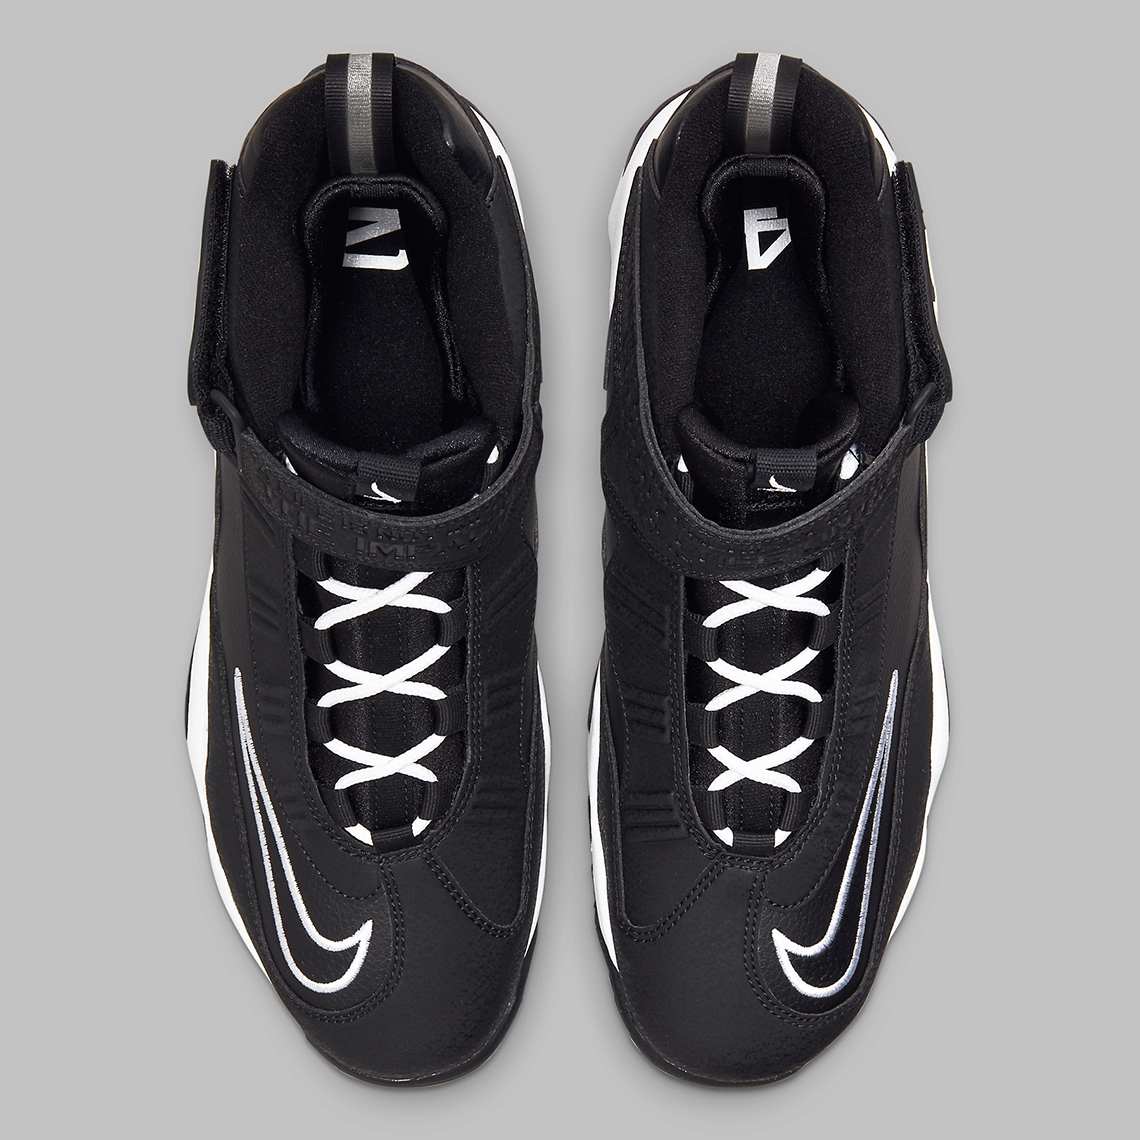 nike air griffey max 1 cleats